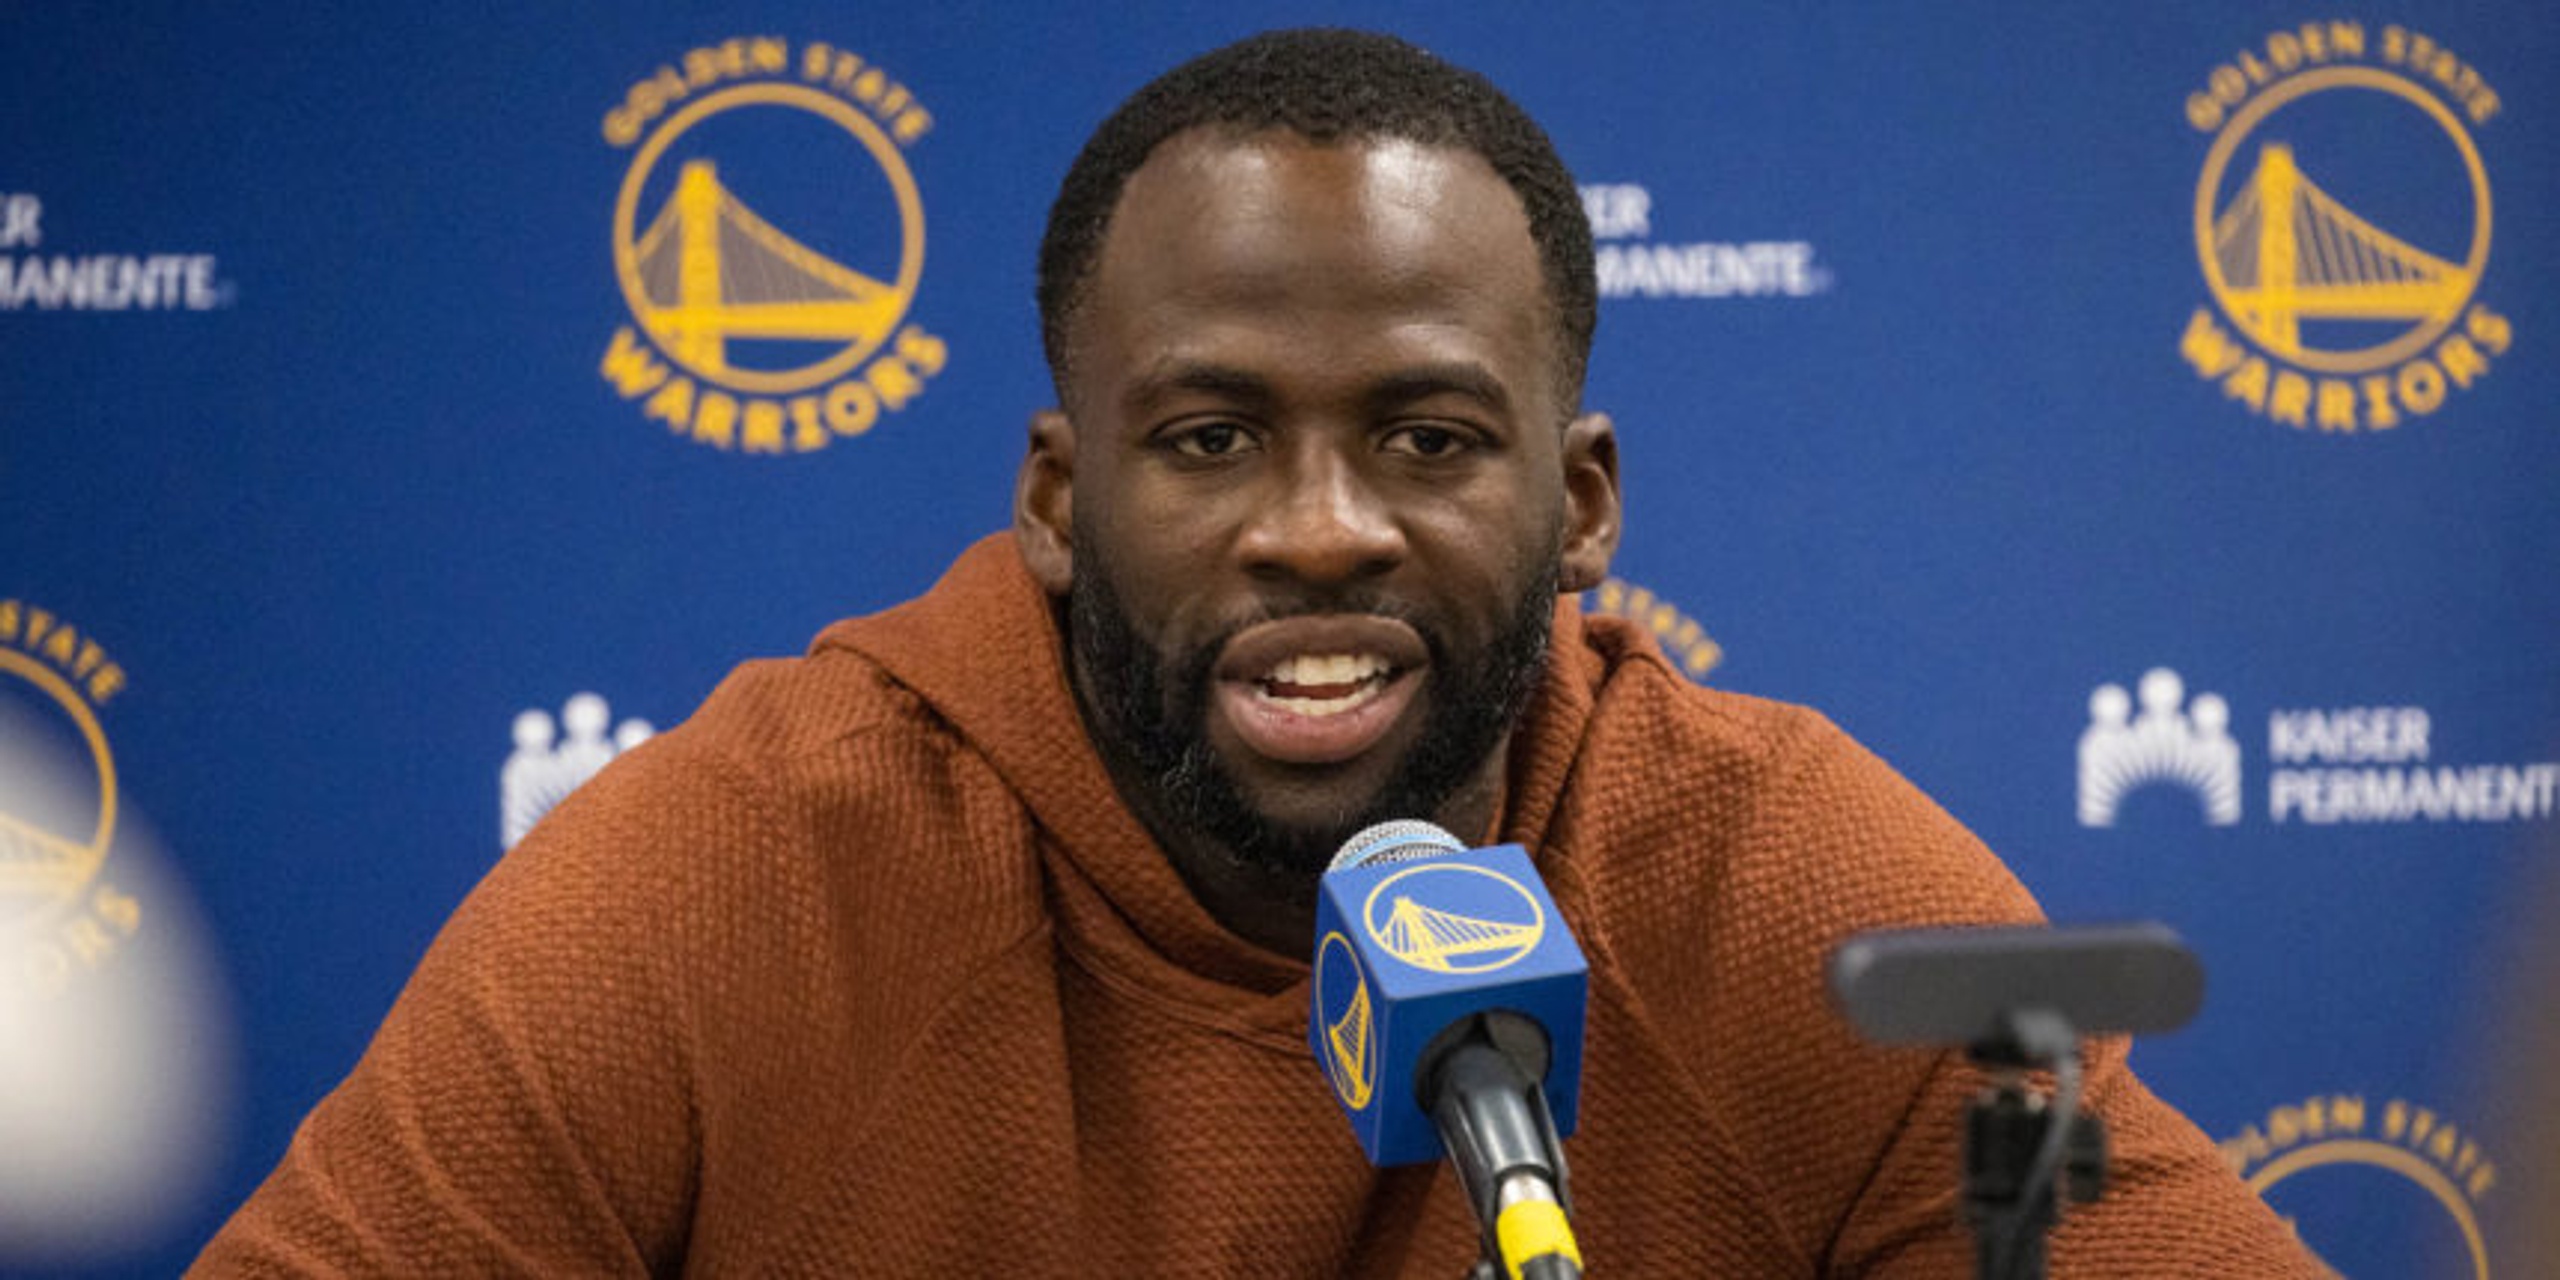 Draymond Green will do TV analyst work for TNT as a player